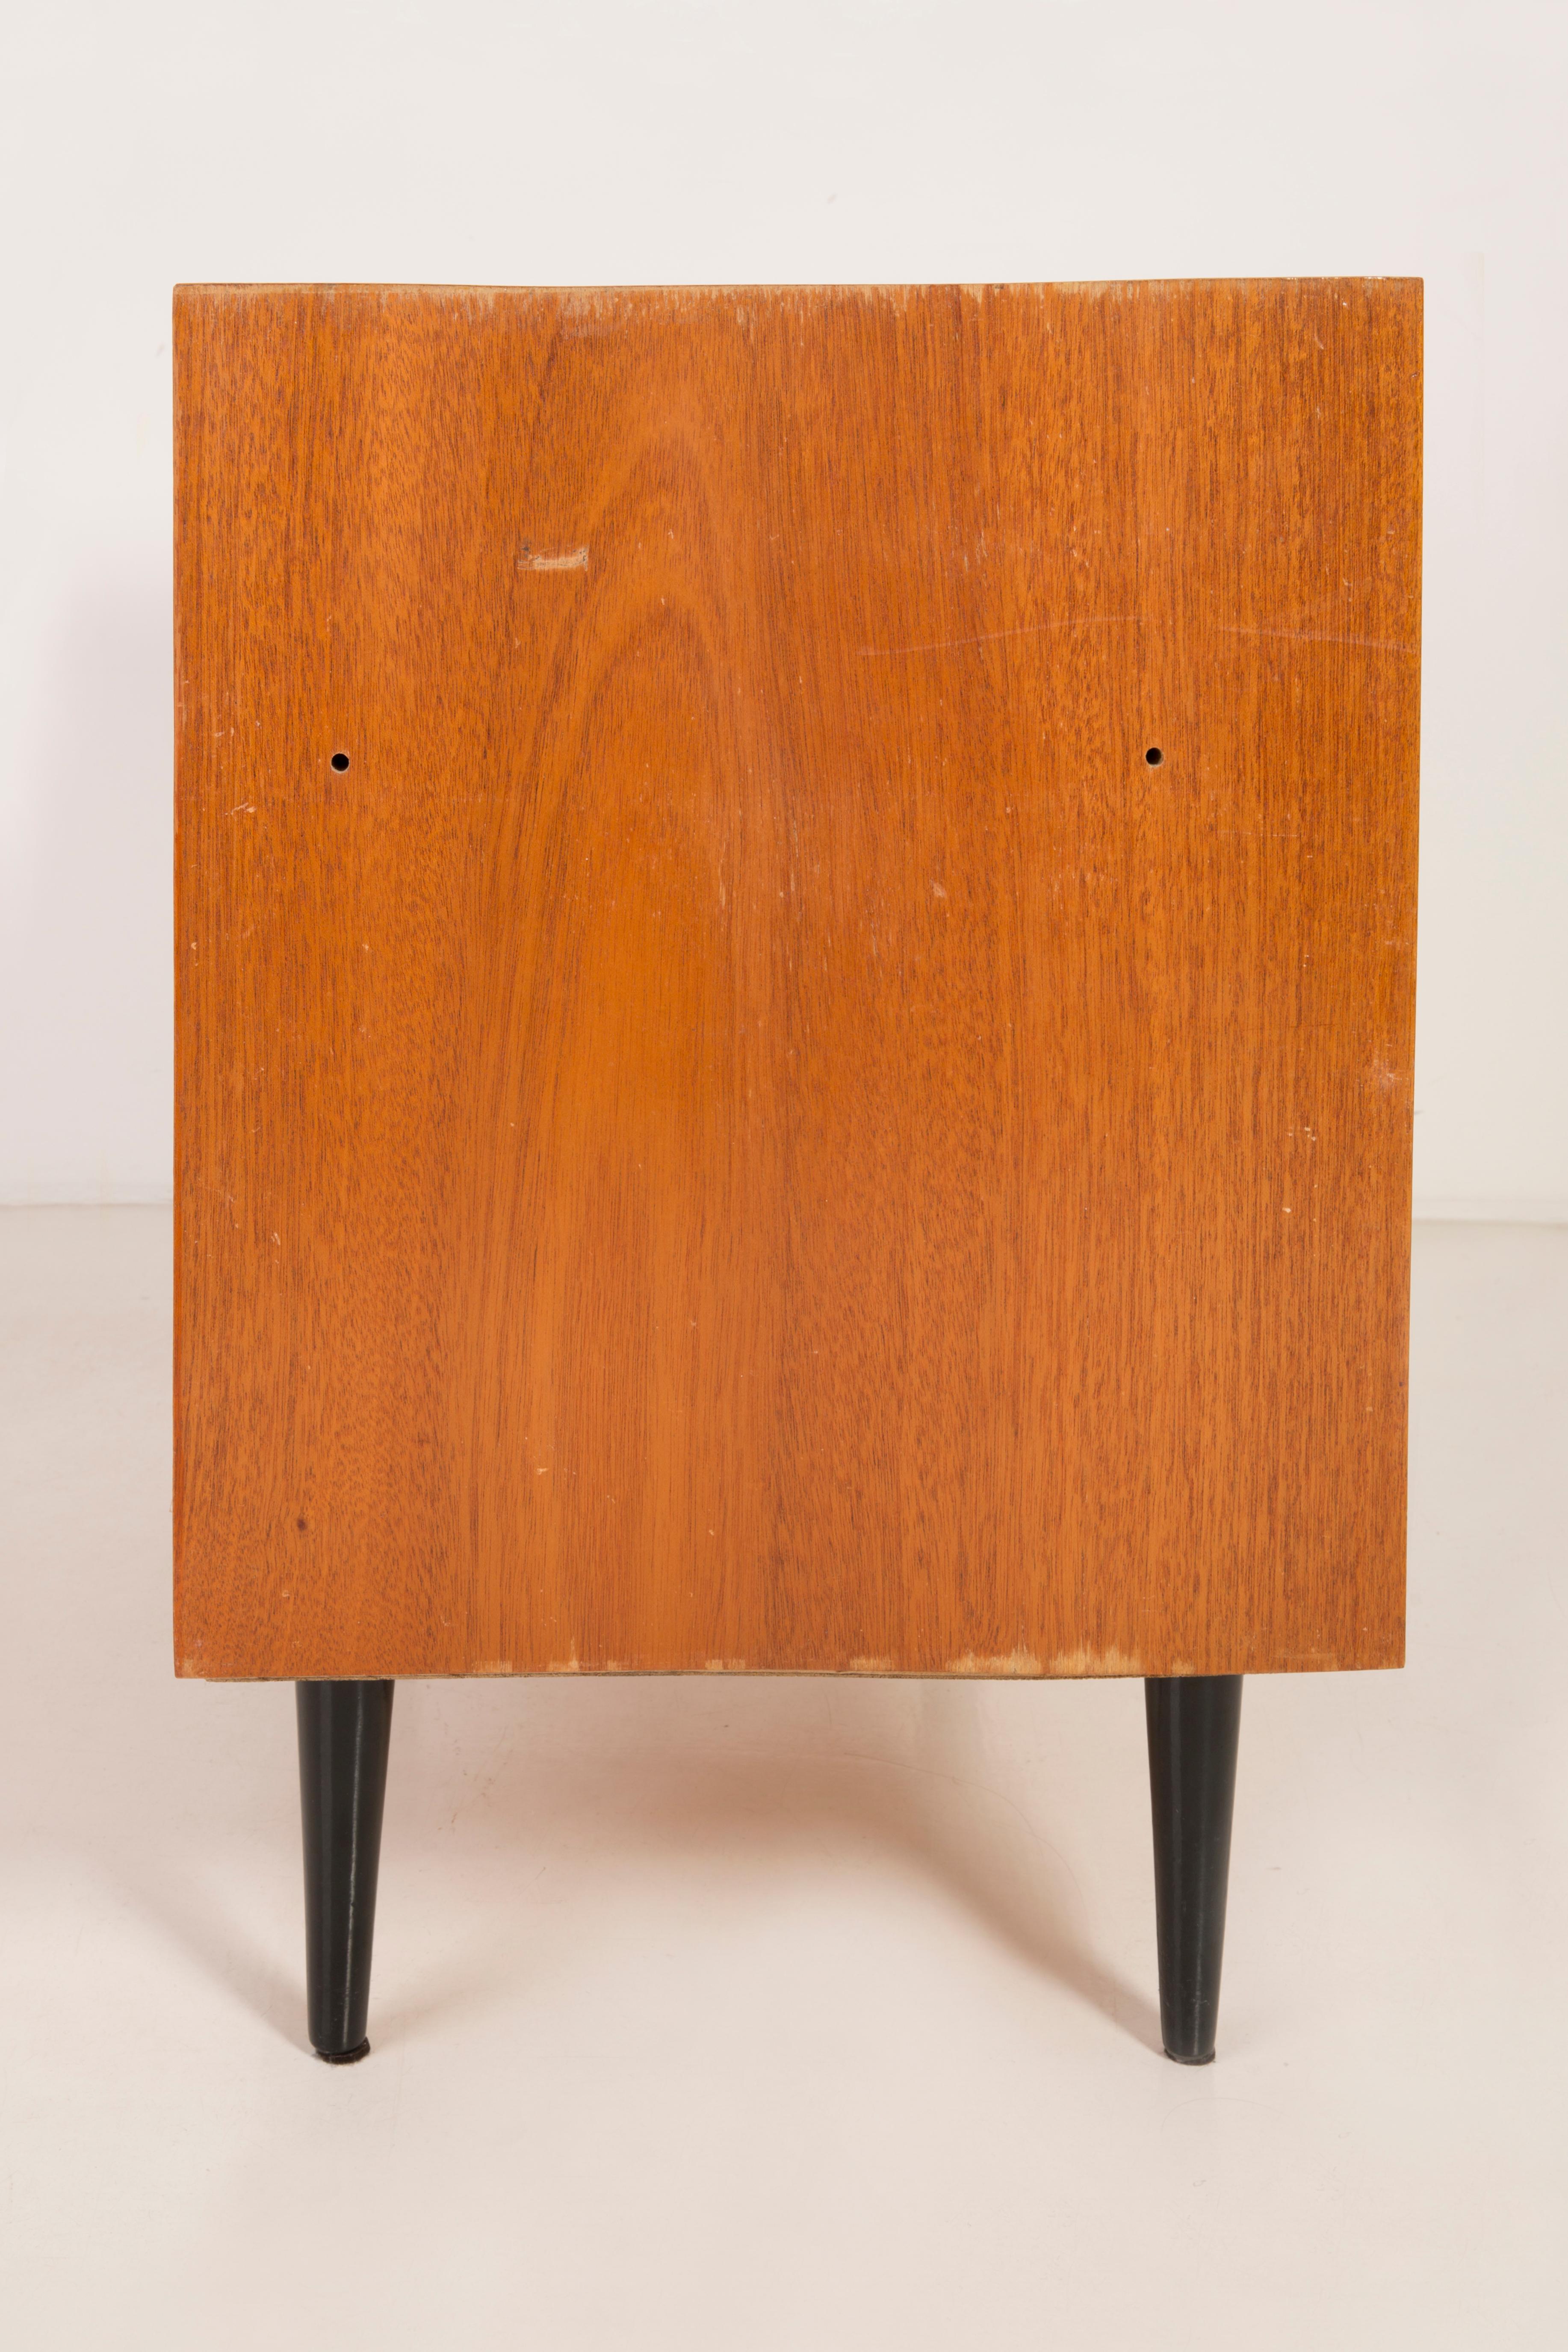 Set of Three Mid-Century Modern Vintage Sideboards, Wood, Poland, 1960s For Sale 12